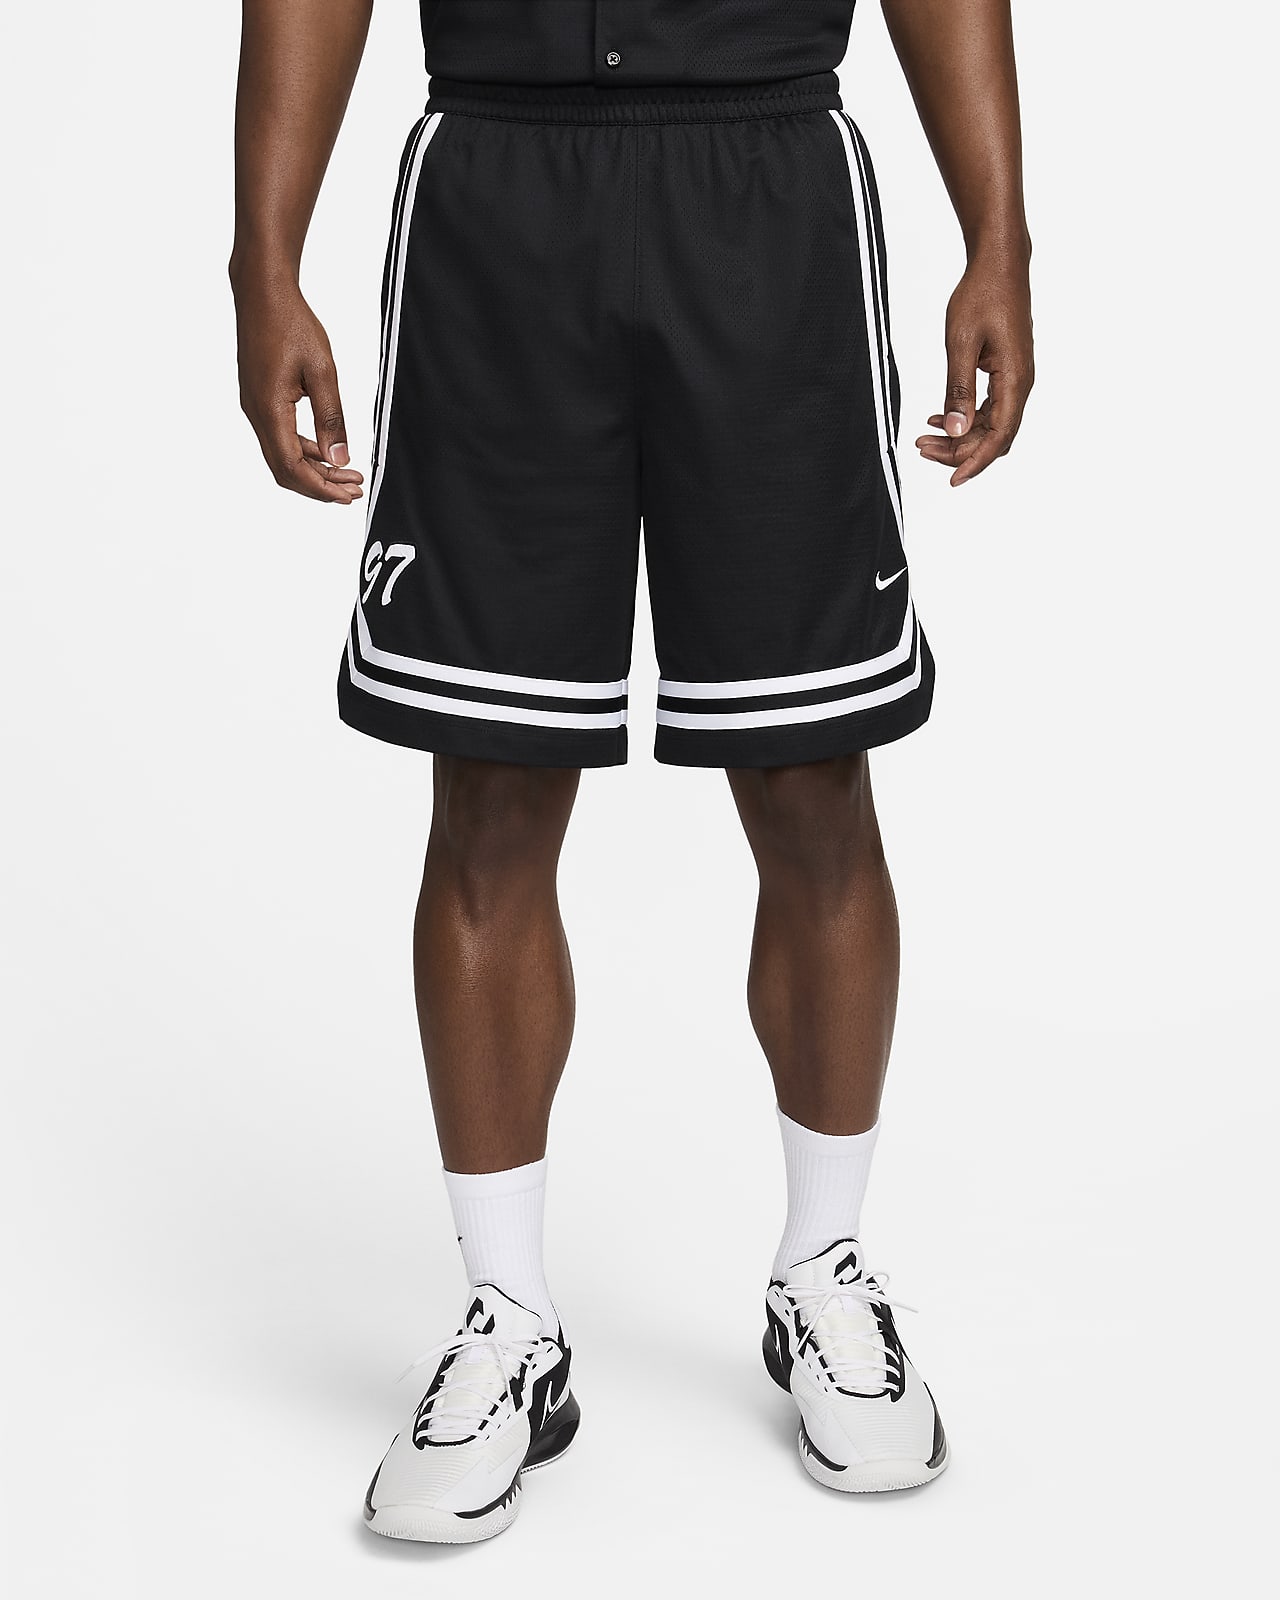 Nike DNA Crossover Men's Dri-FIT 8" Basketball Shorts